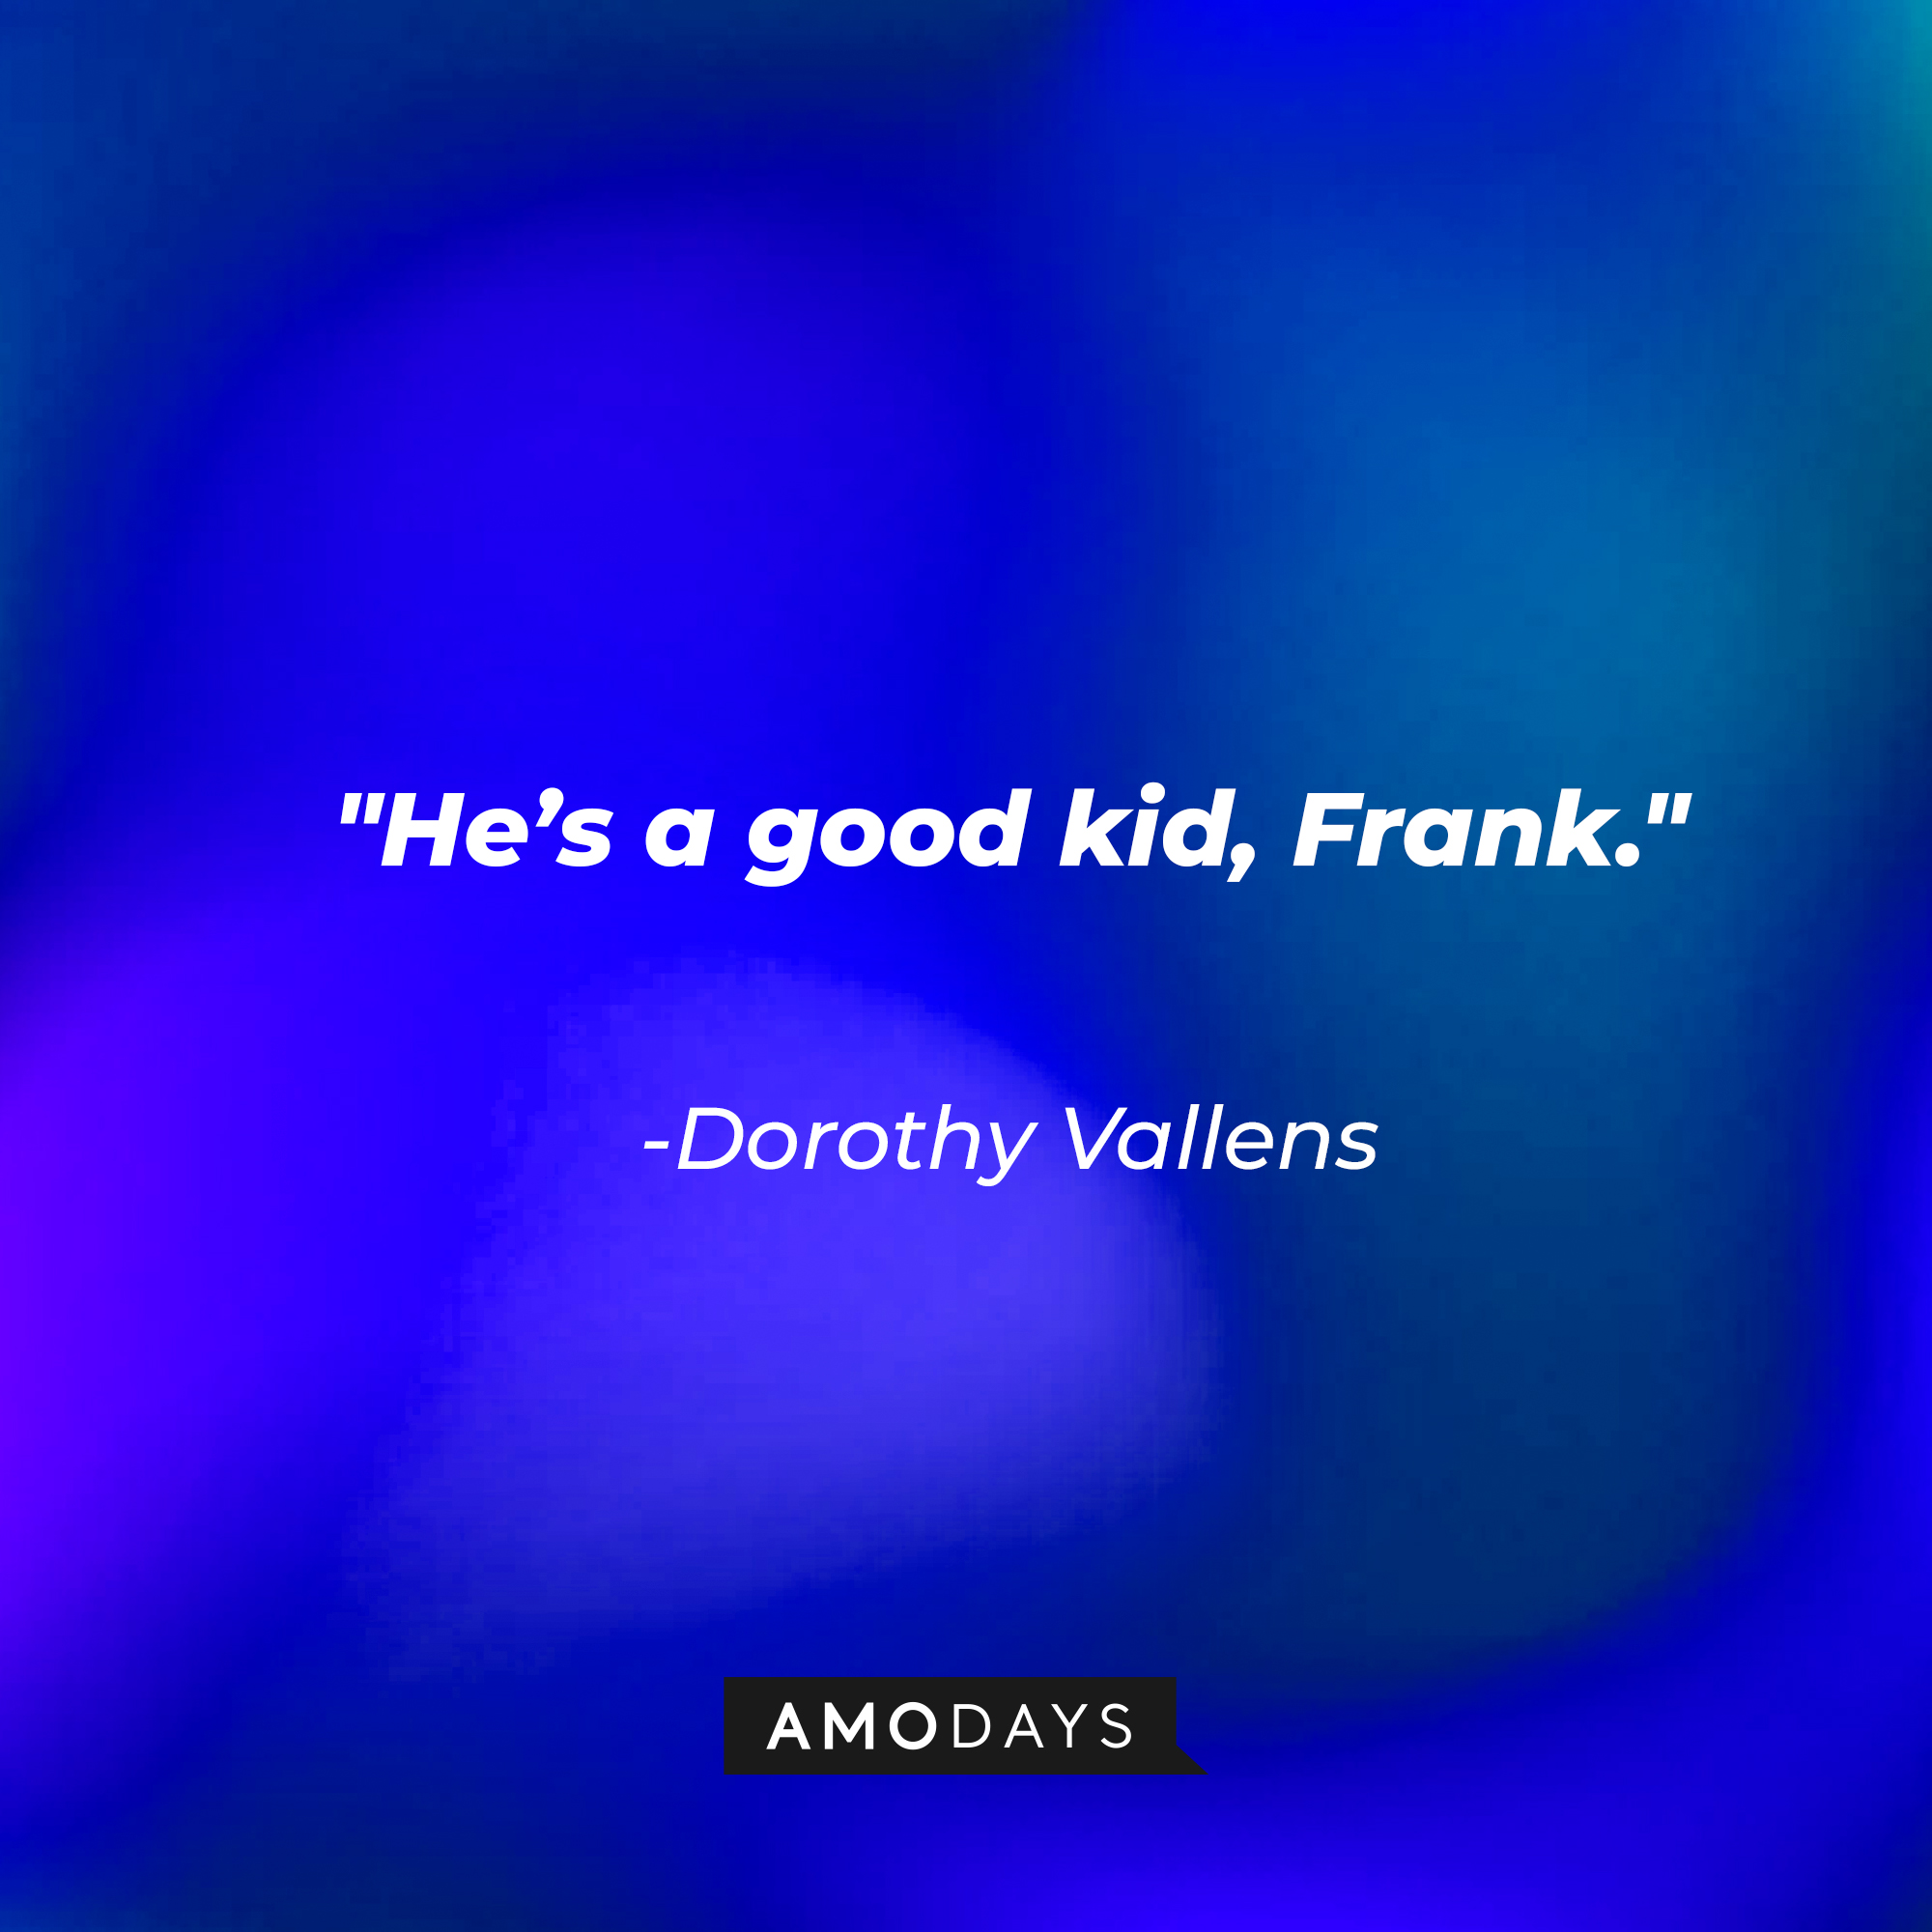 Dorothy Vallens with her quote: "He's a good kid, Frank." | Source: facebook.com/BlueVelvetMovie